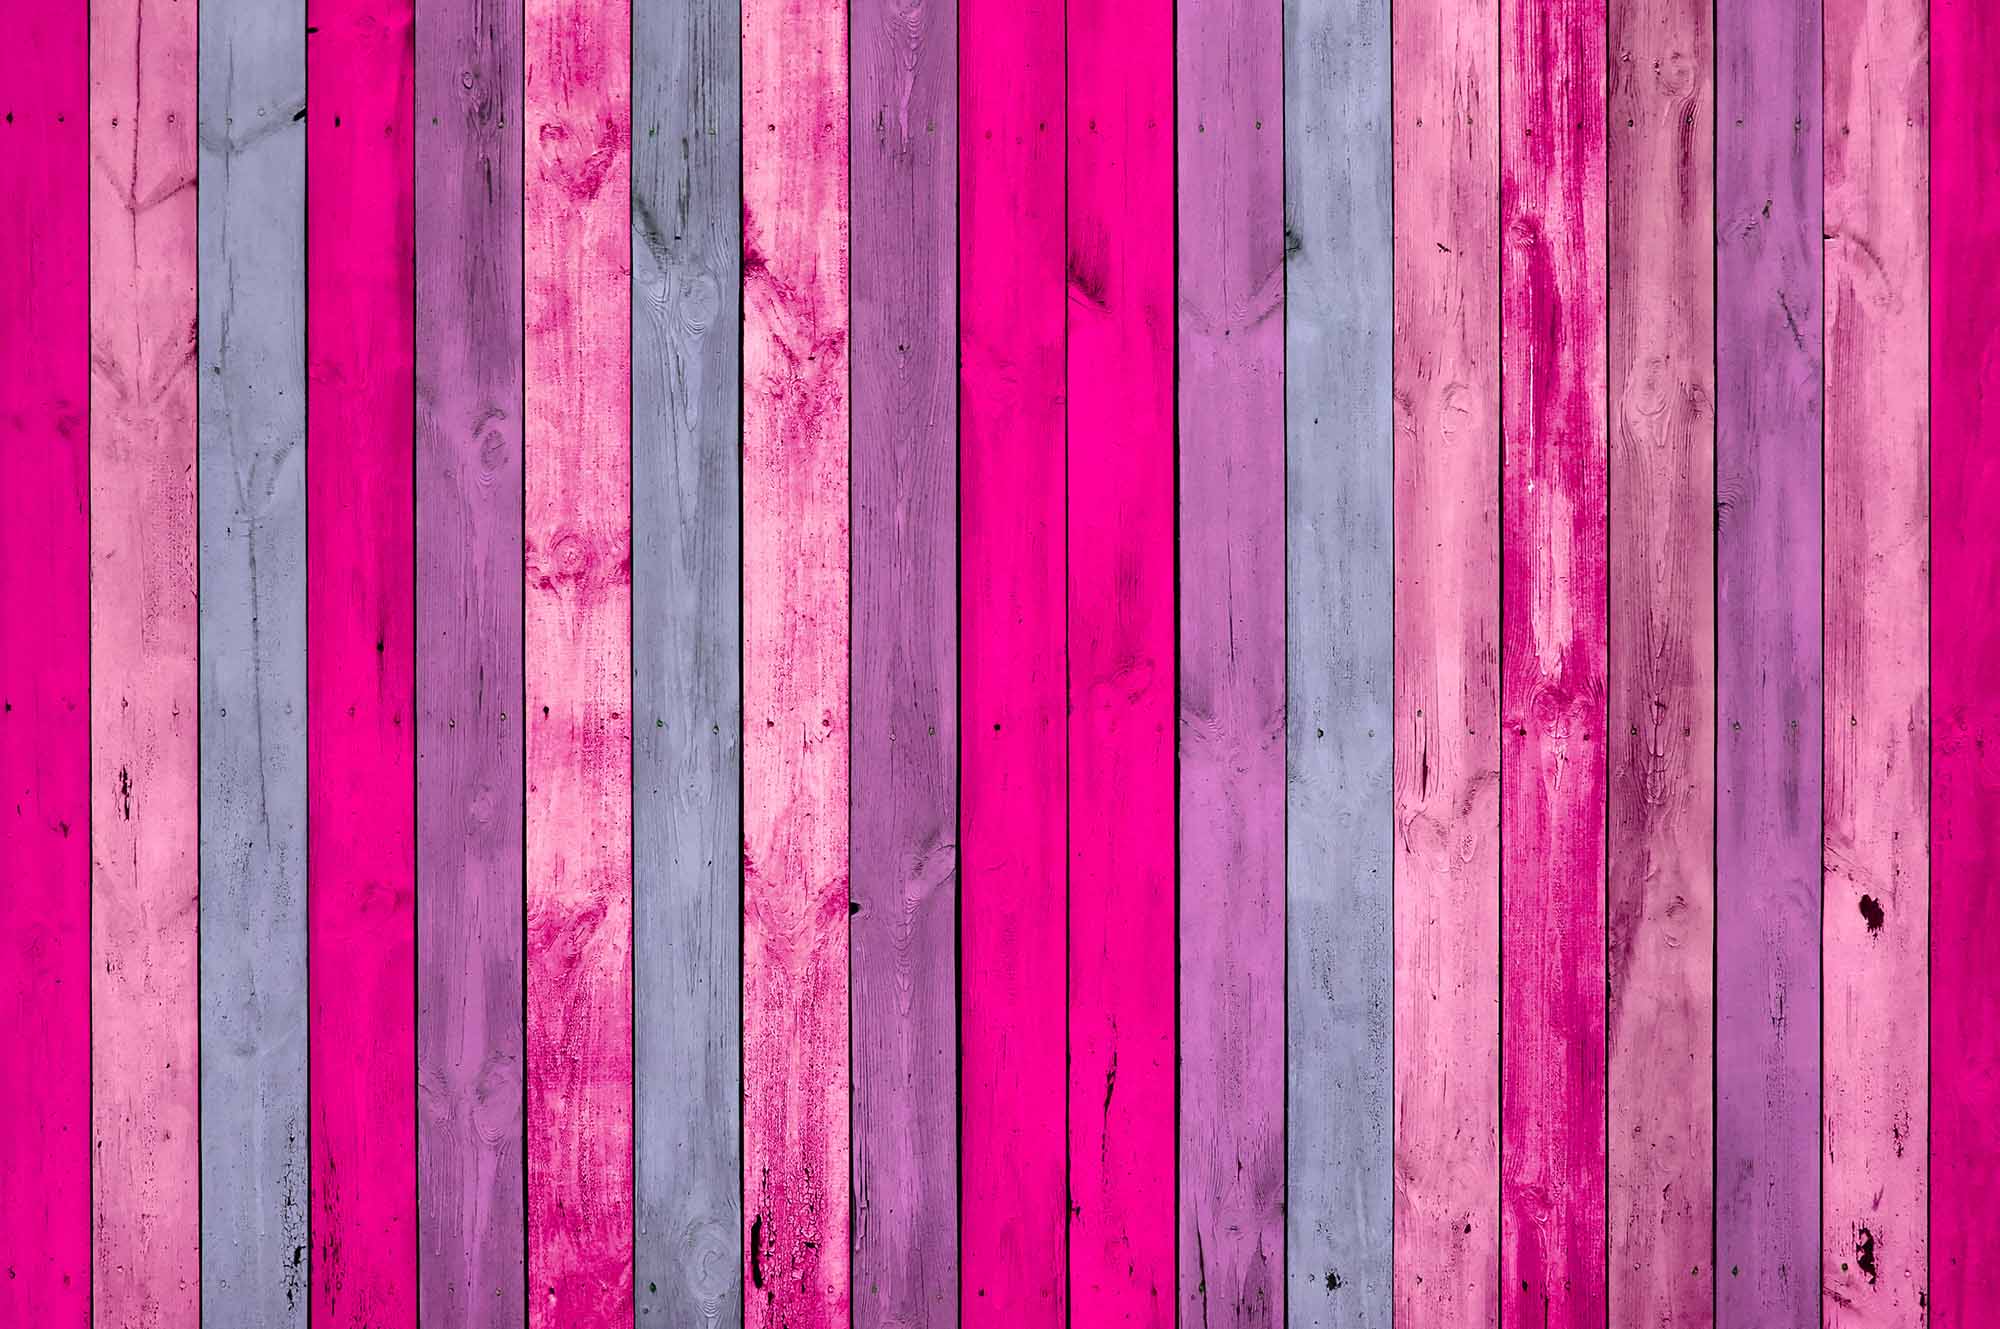 Wallpaper Mural Wall of Pink Wood Planks Muralunique